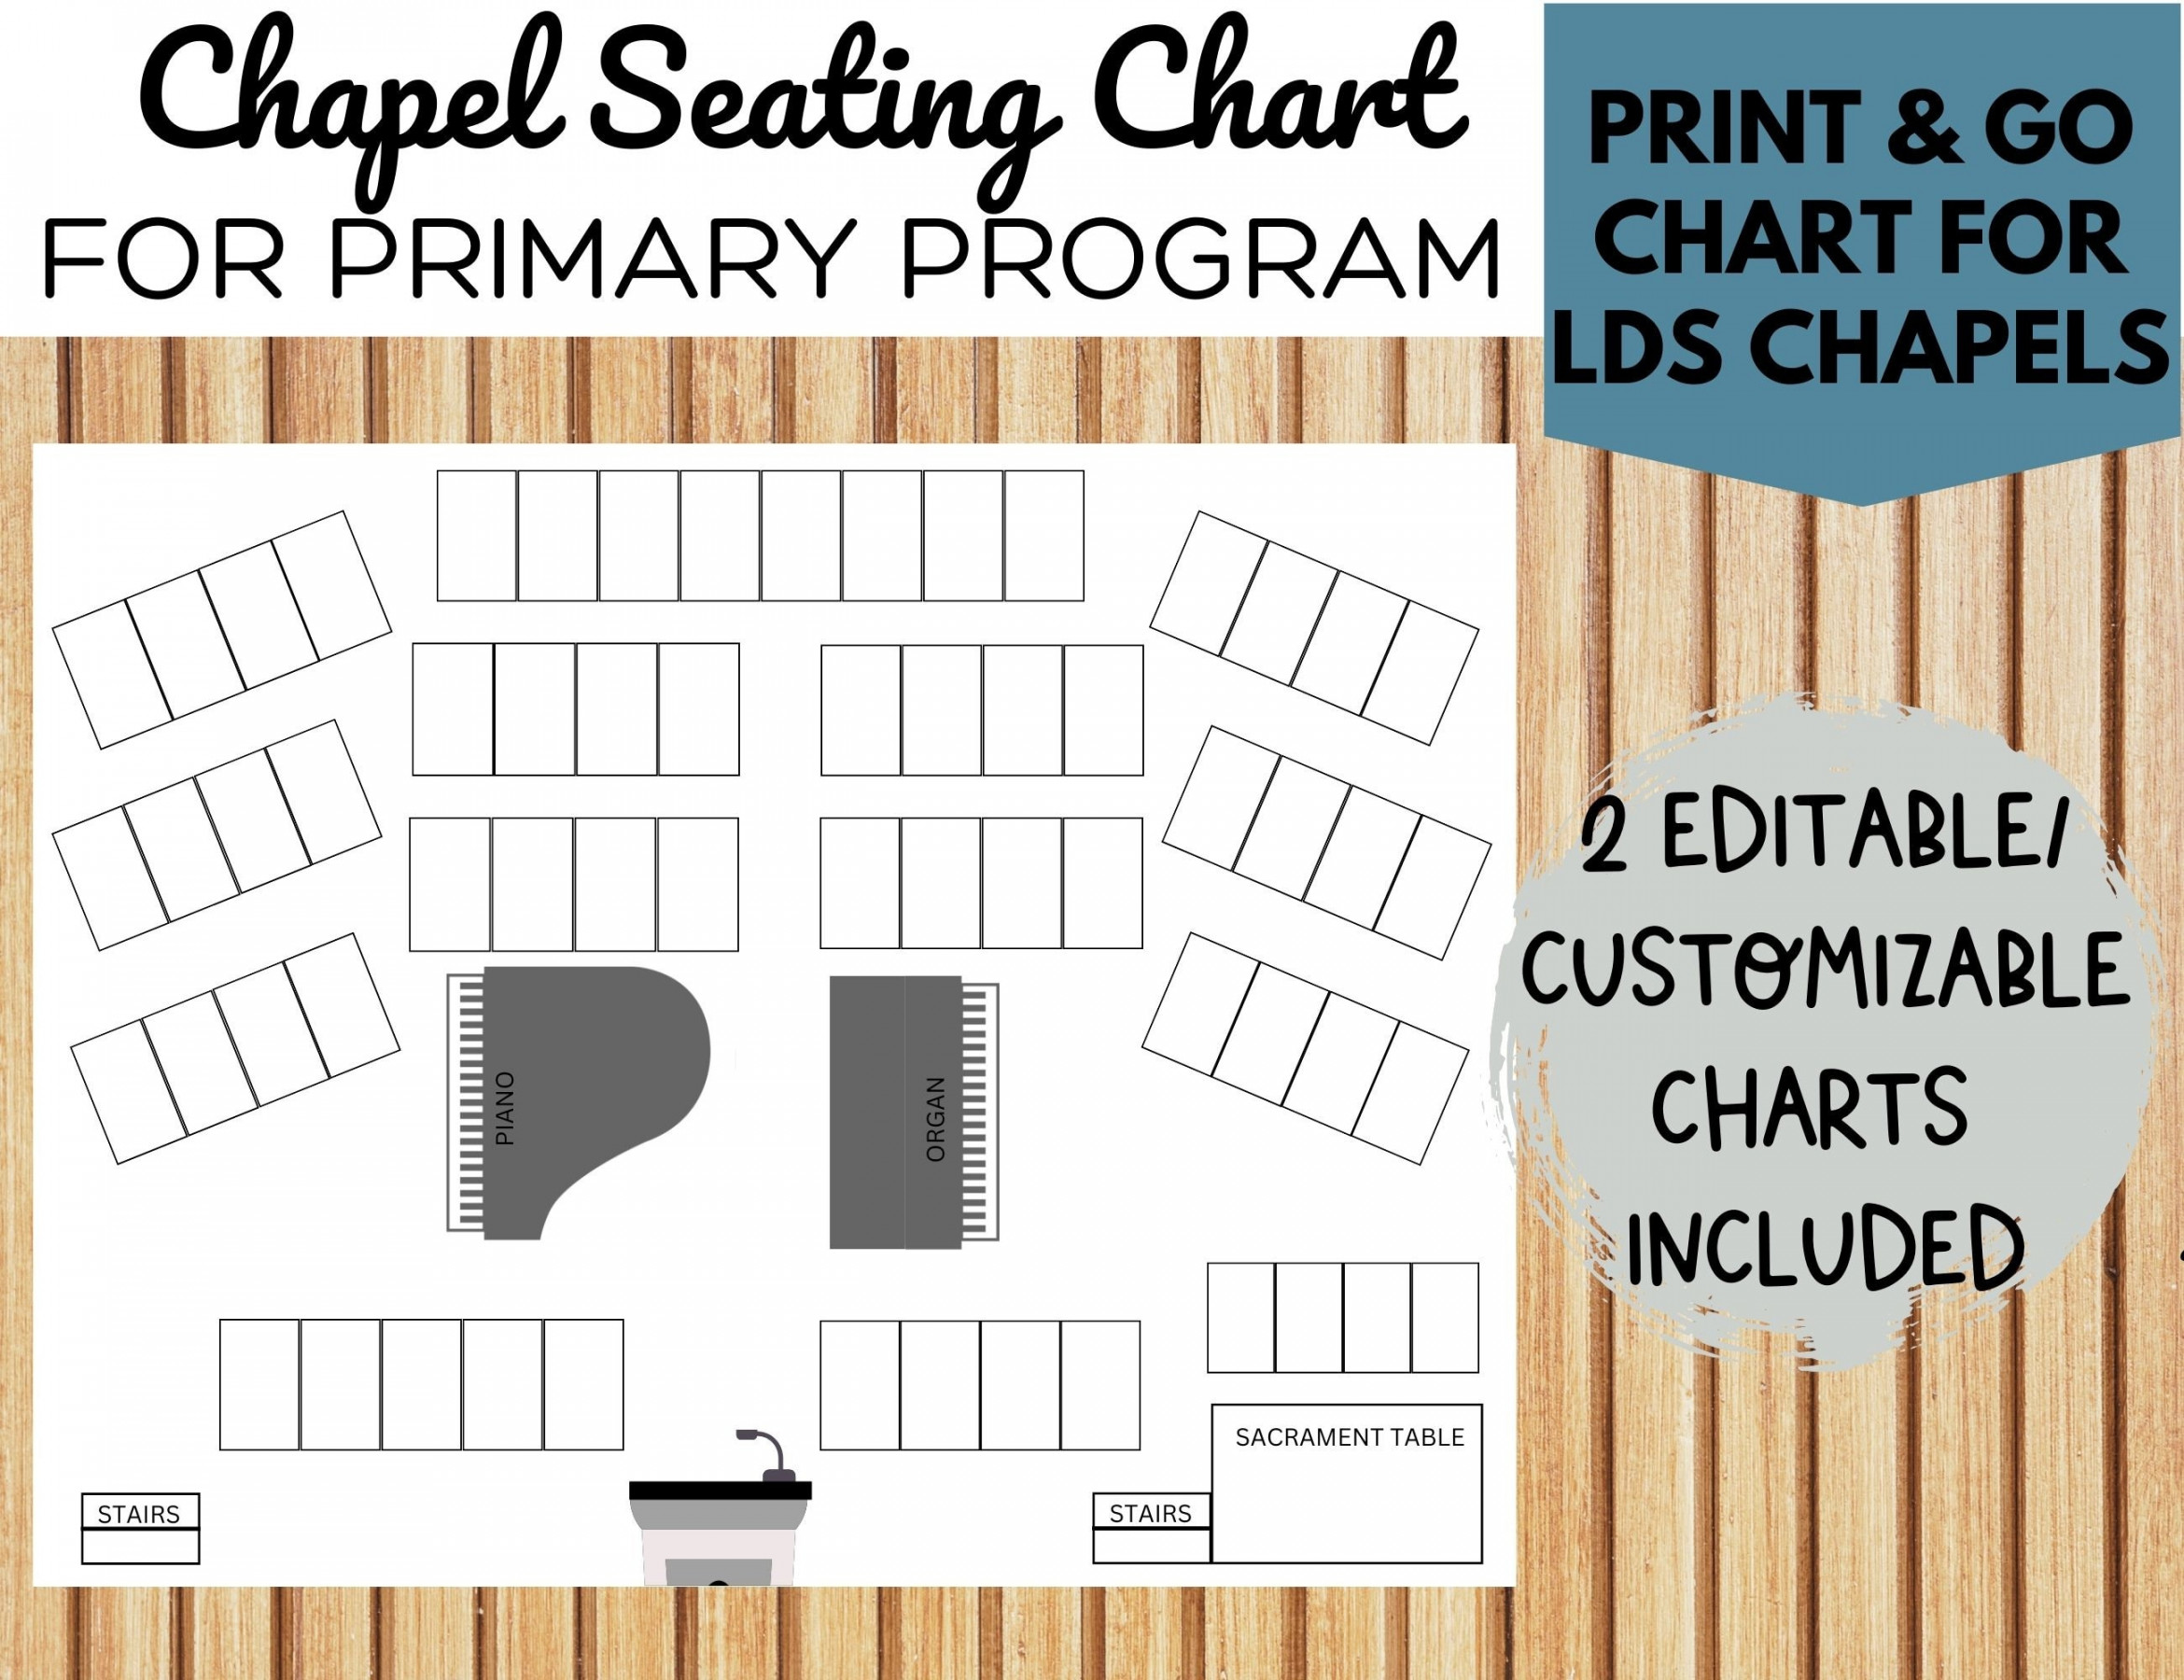 LDS Chapel Seating Chart for Primary Program, Choir, ETC - Etsy